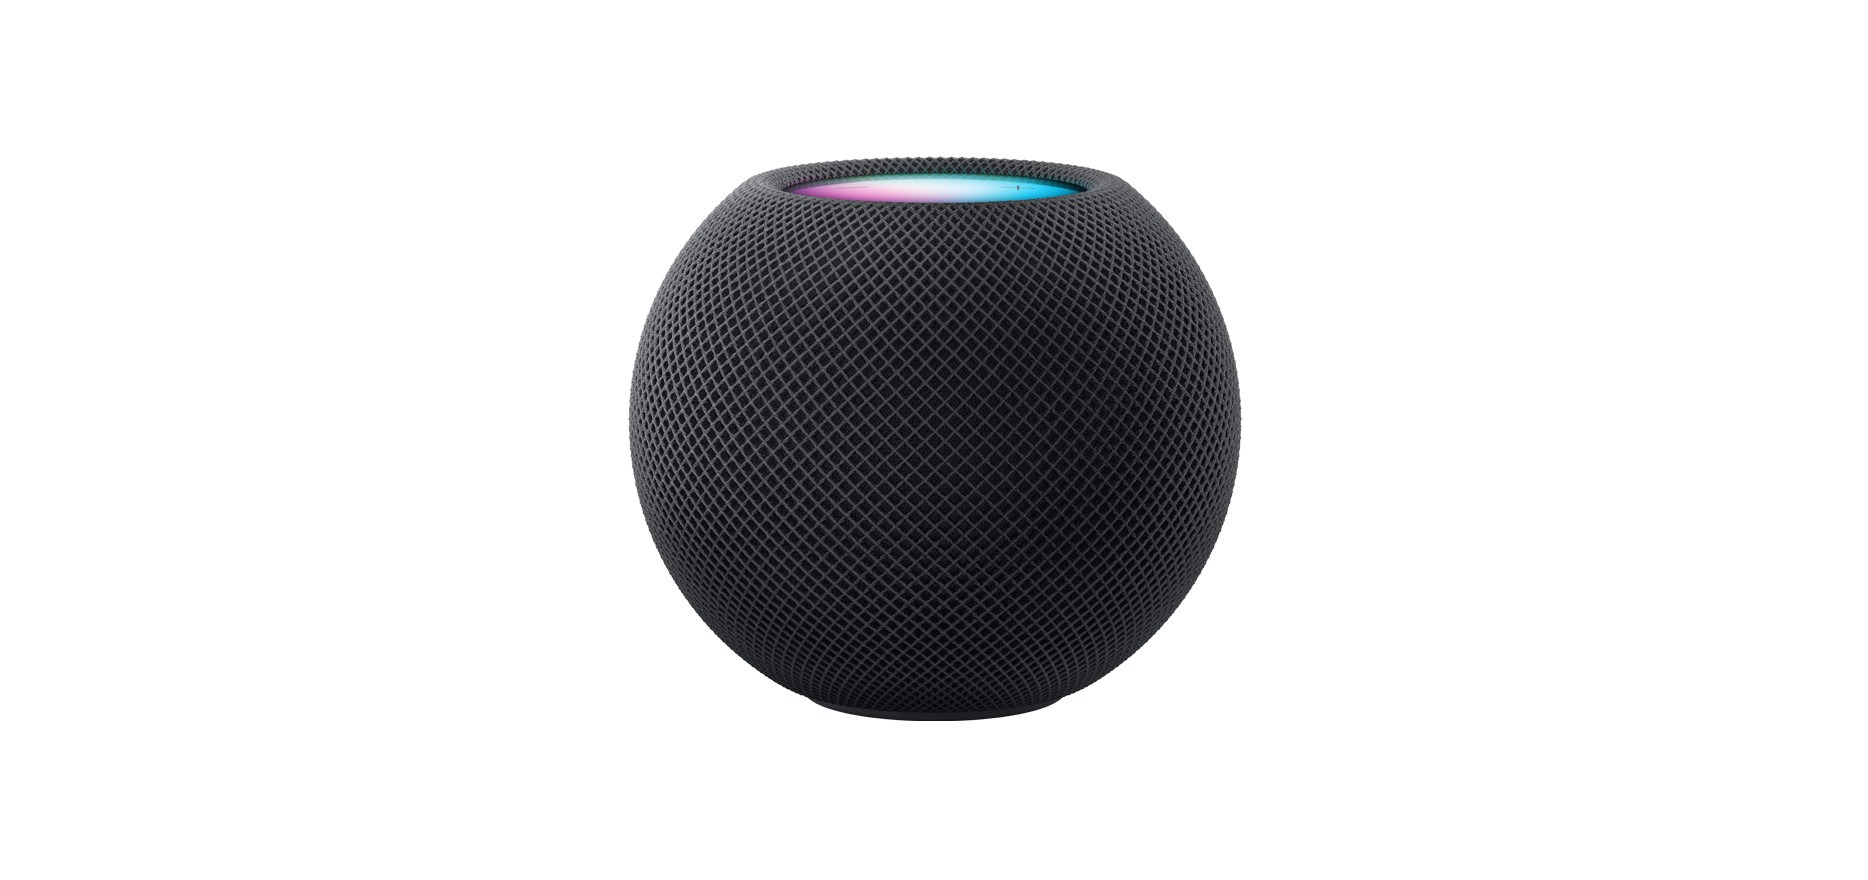 Apple MY5G2HN/A HomePod Mini with Siri Assistant Smart Speaker, Space Grey